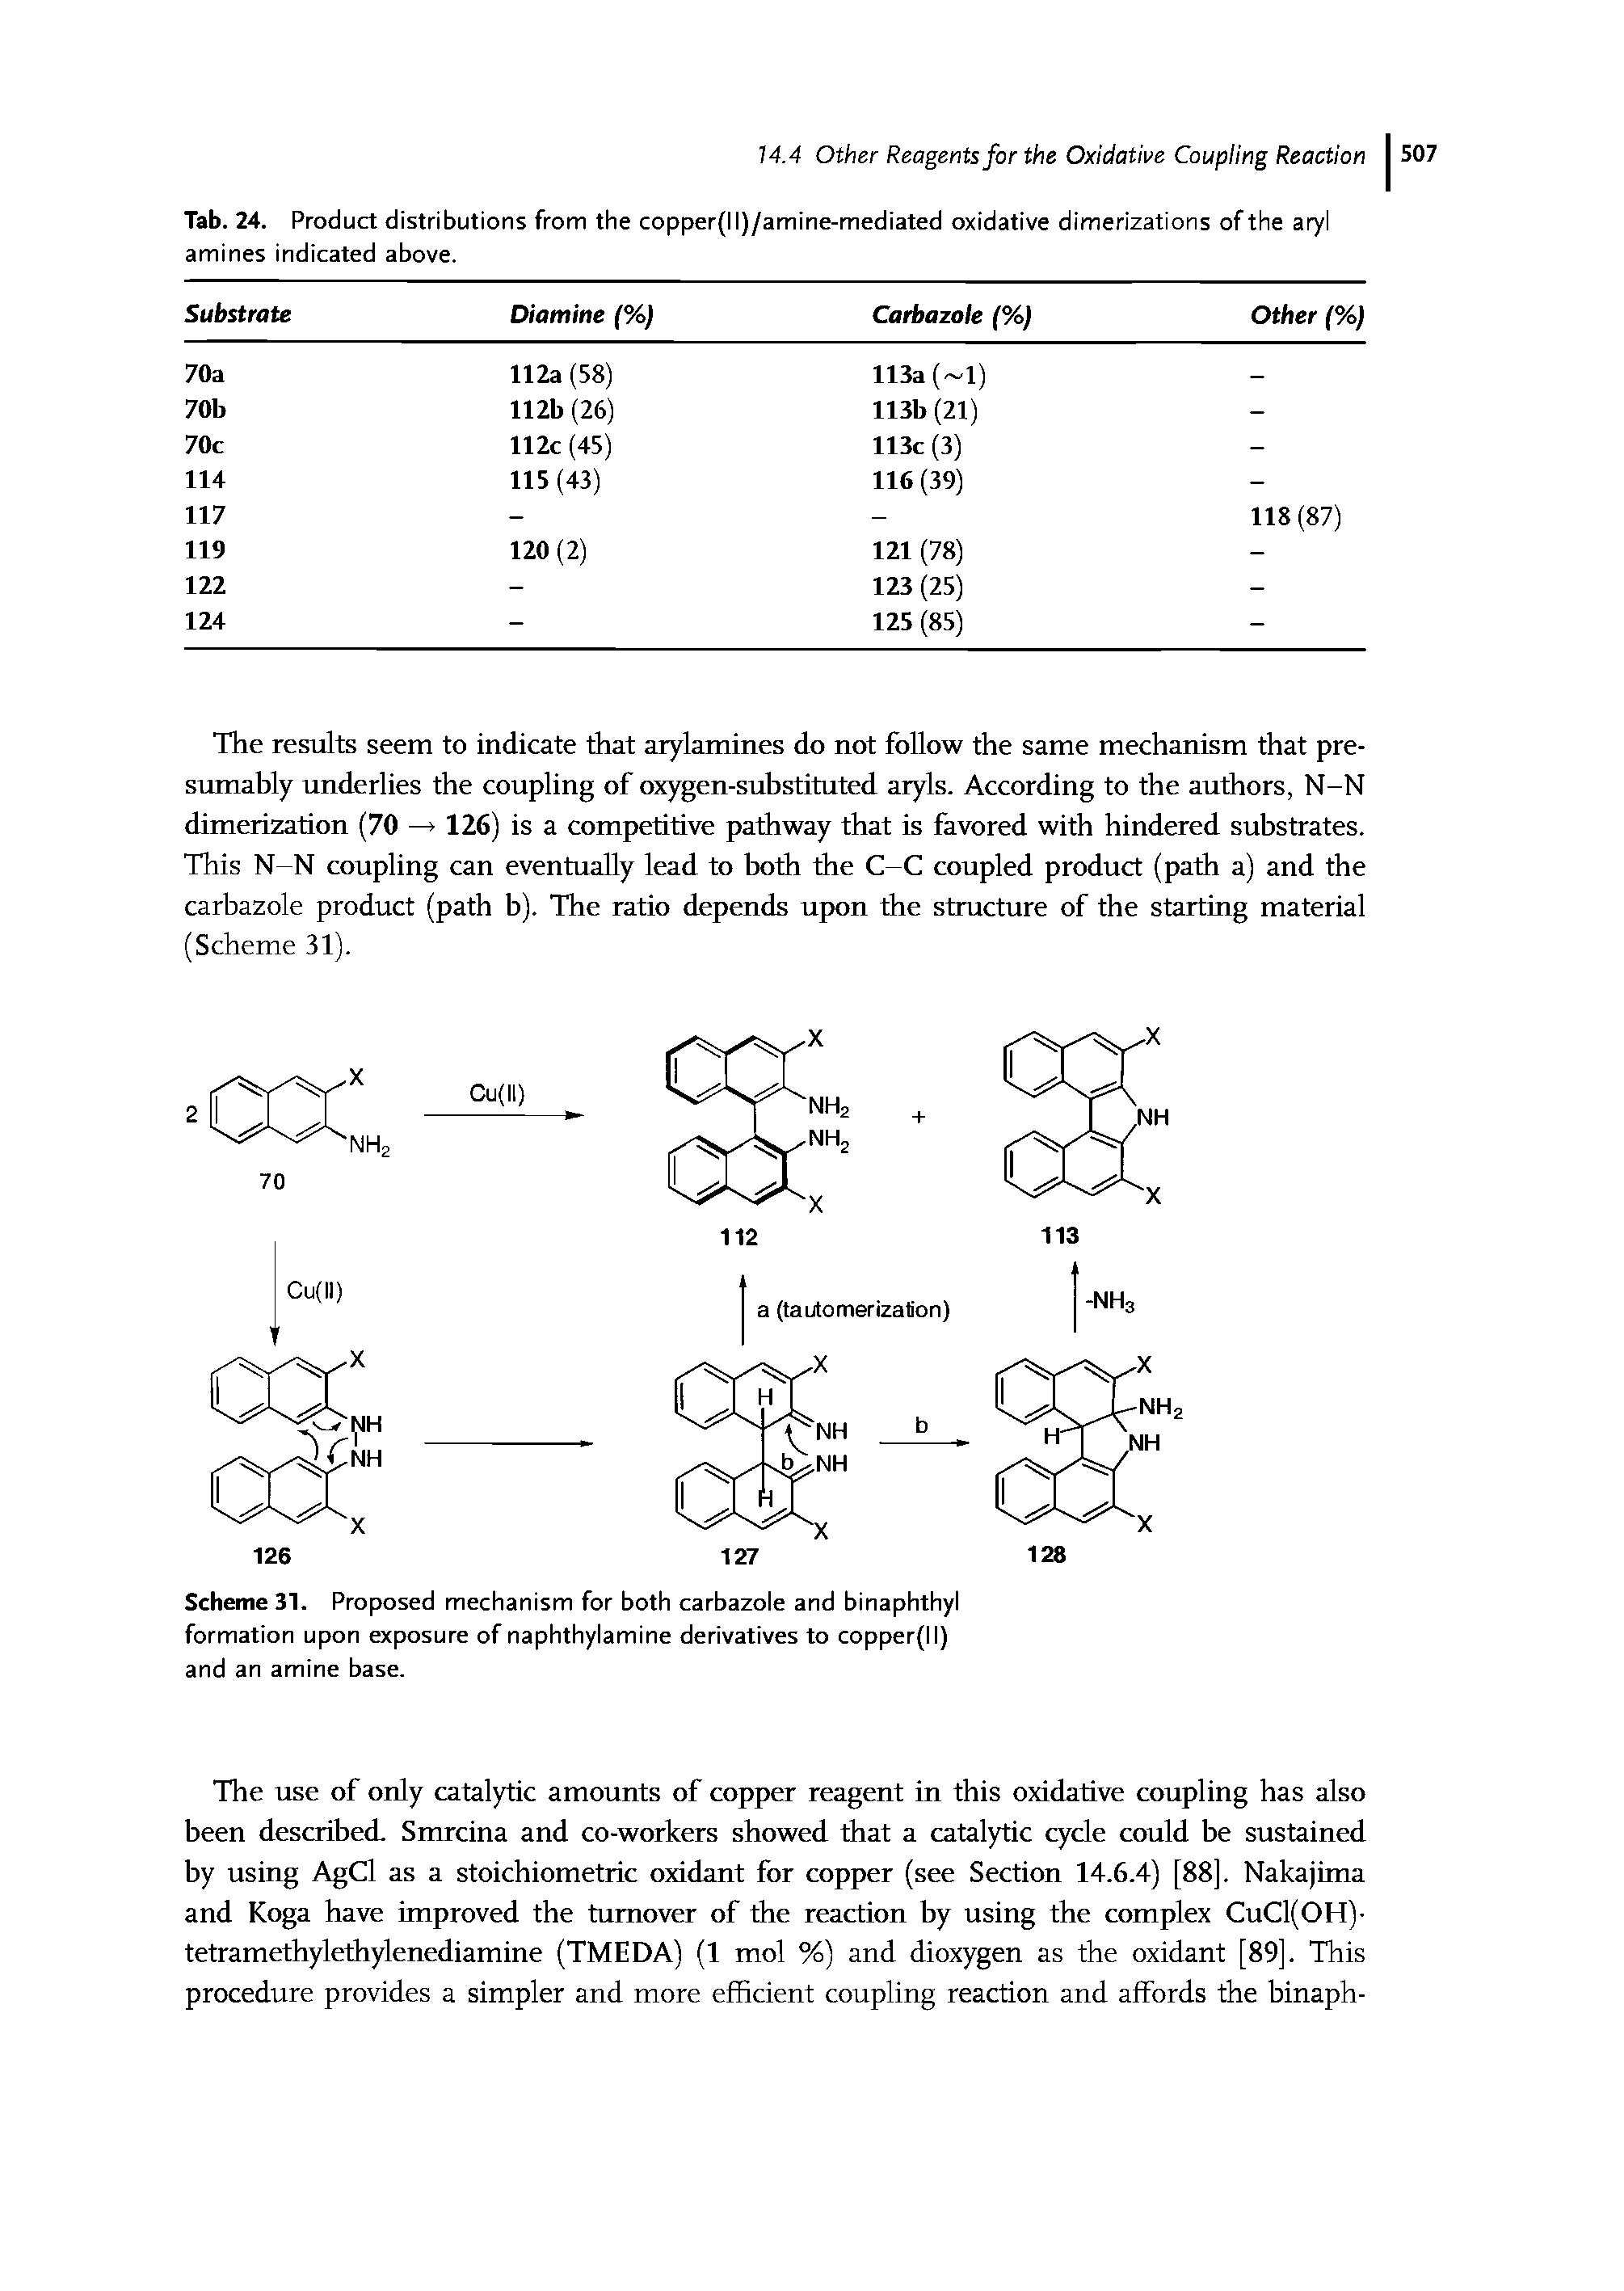 Tab. 24. Product distributions from the copper(ll)/amine-mediated oxidative dimerizations of the aryl amines indicated above.